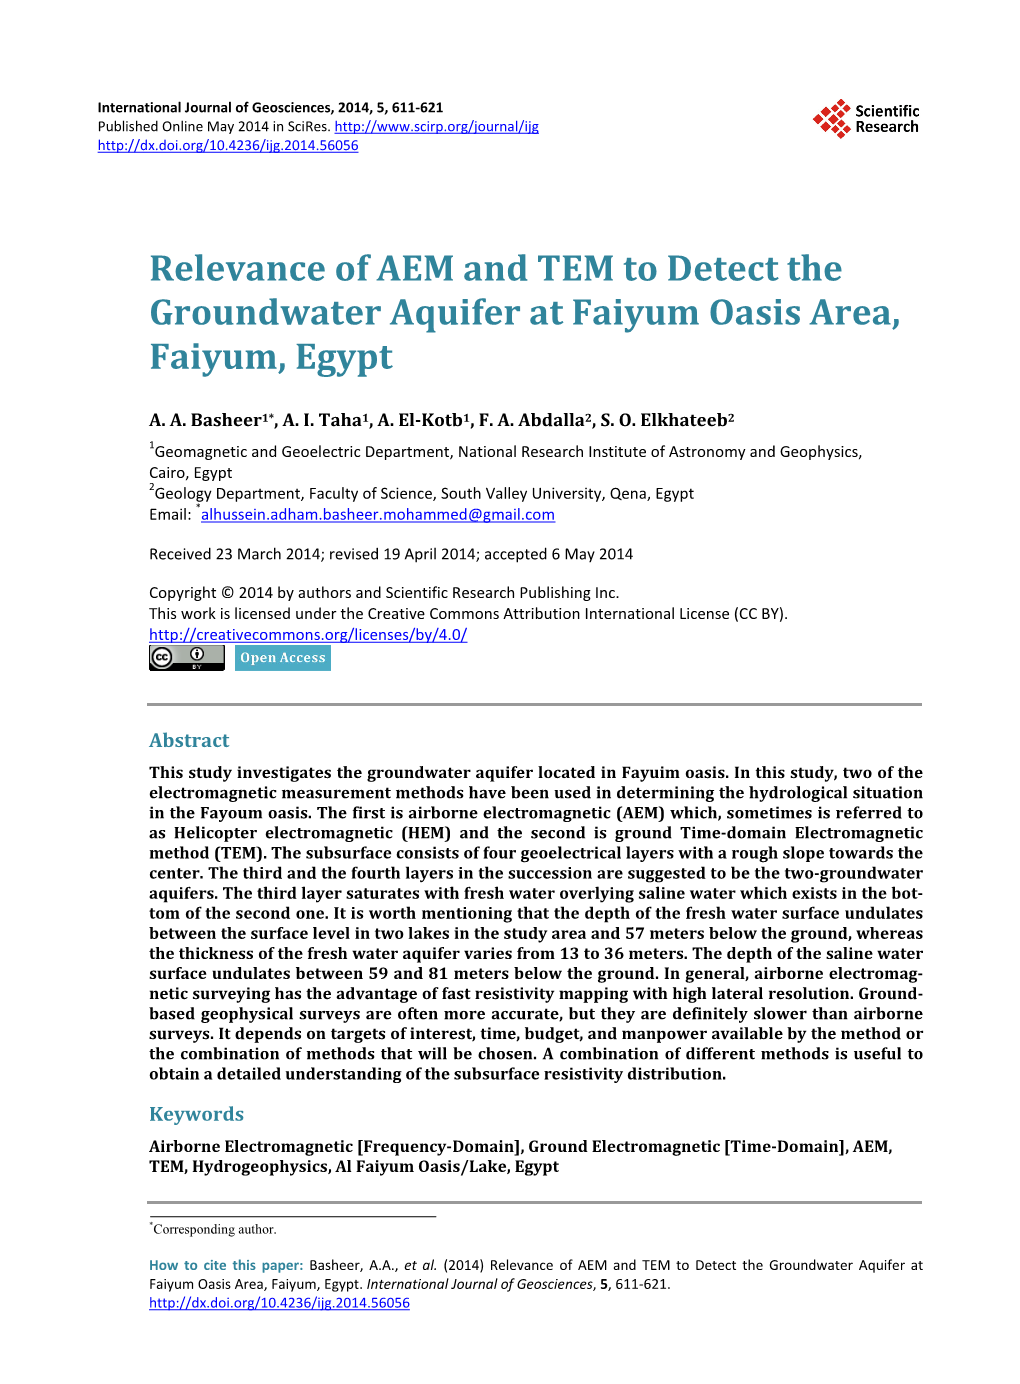 Relevance of AEM and TEM to Detect the Groundwater Aquifer at Faiyum Oasis Area, Faiyum, Egypt